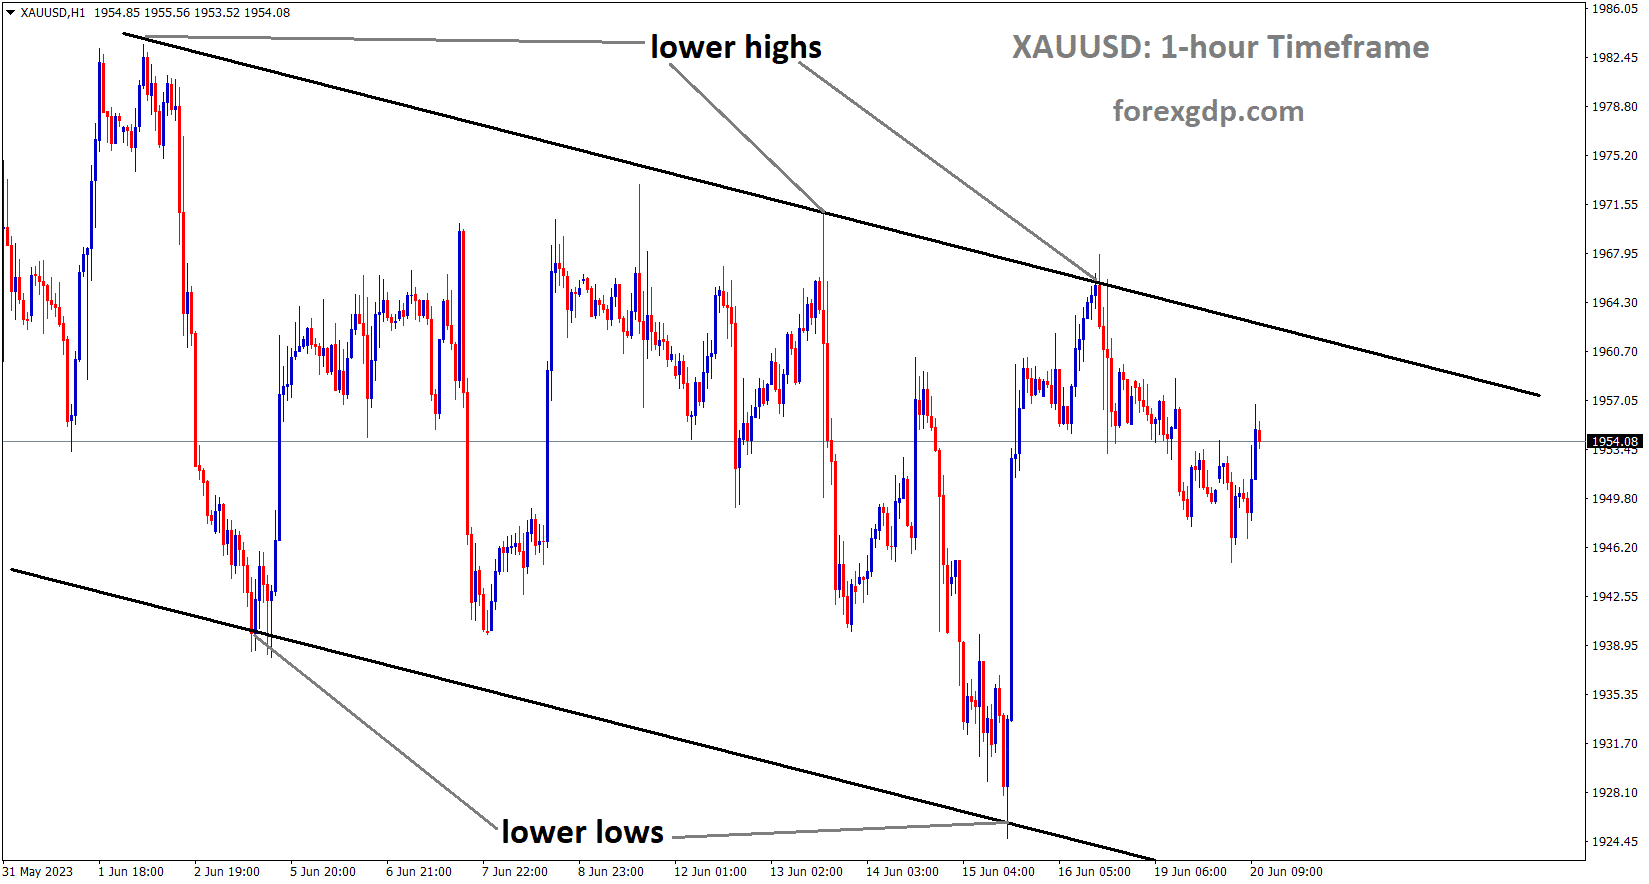 XAUUSD Gold Price is moving in an Ascending channel and the market has fallen from the lower high area of the channel